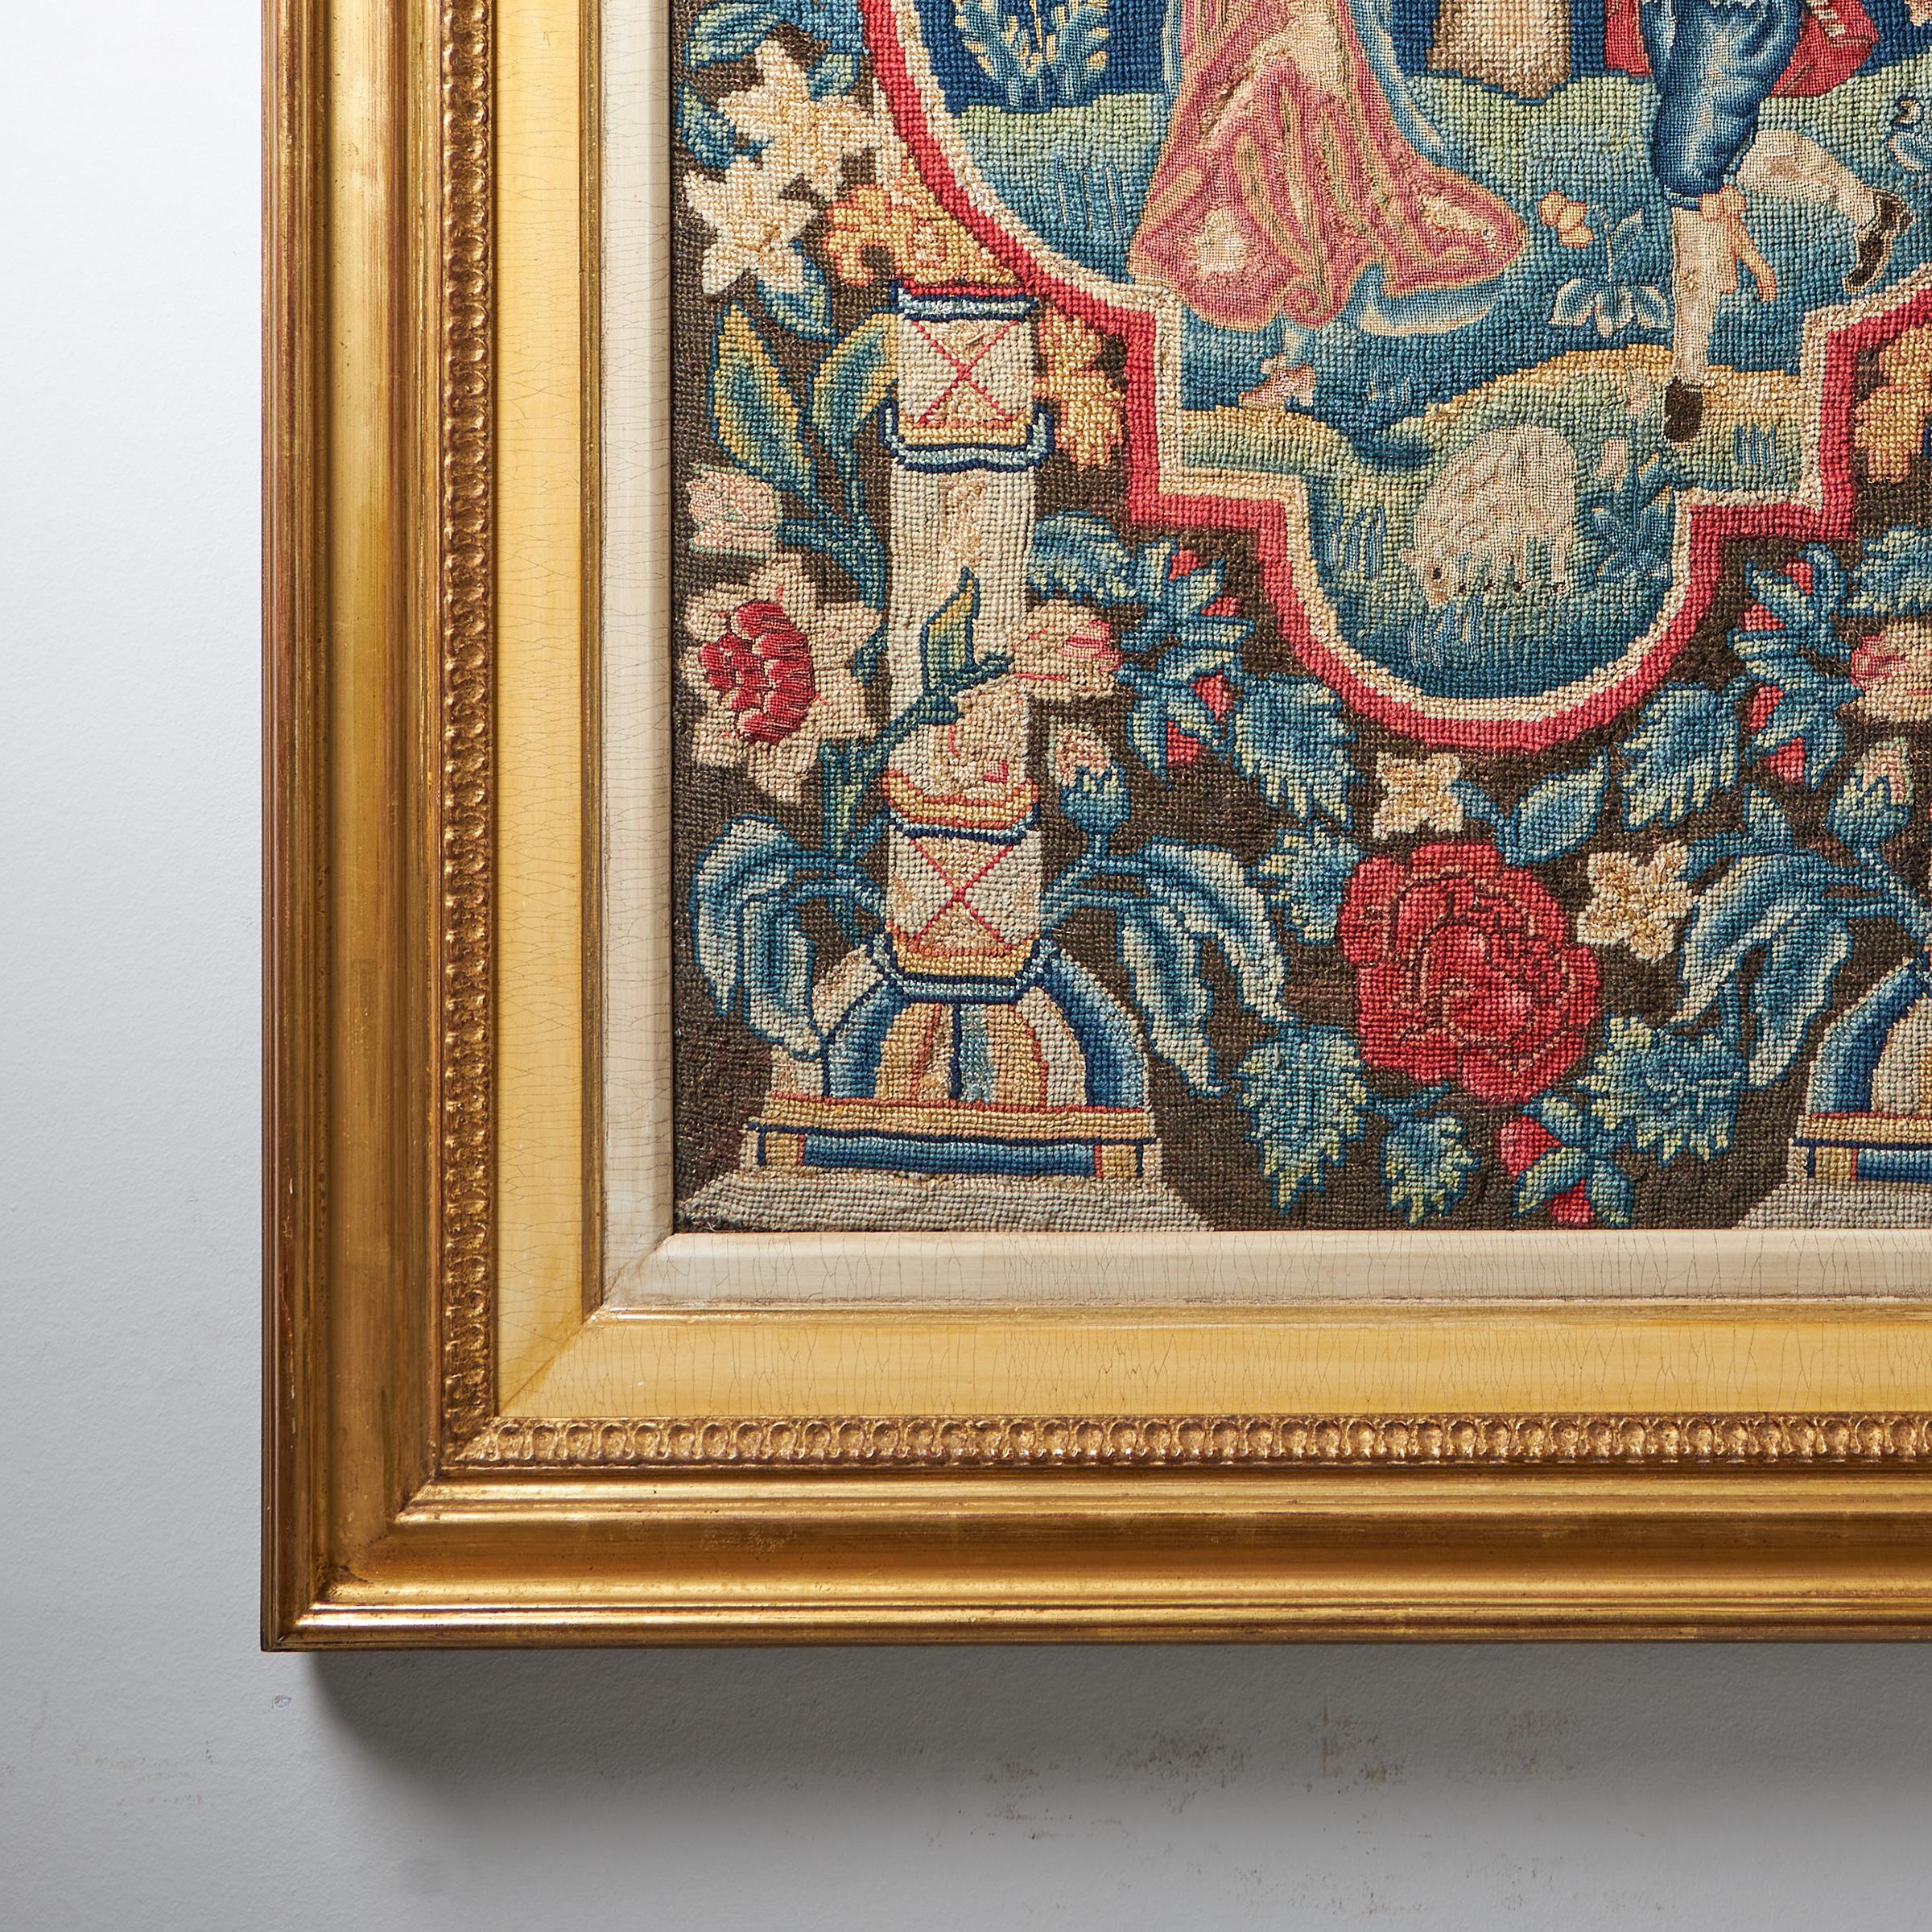 A Rare and Vibrant Framed 18th Century George II Needlework Picture, Circa 1730-1